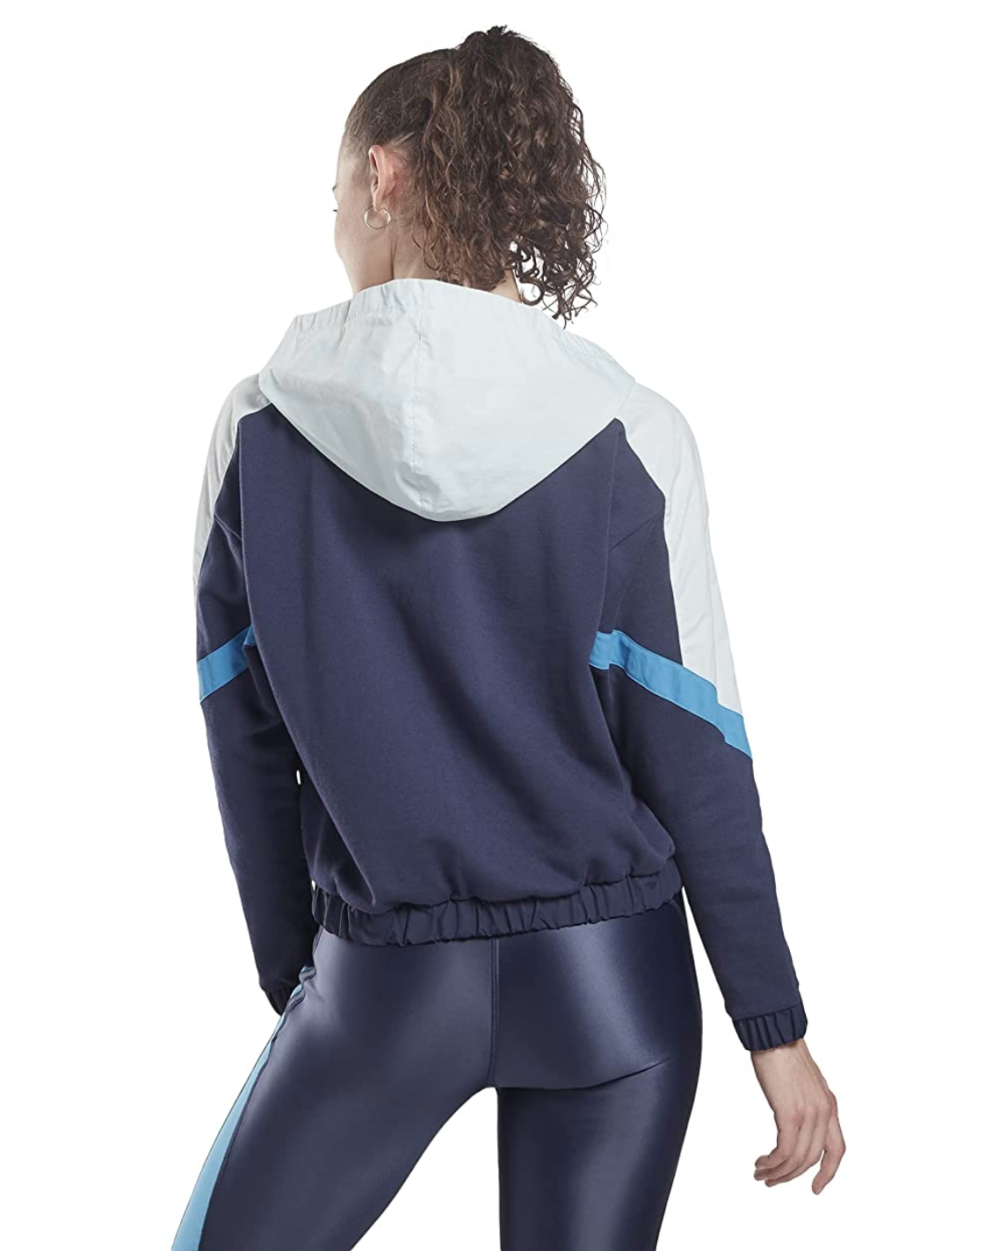 Core 10 by Reebok Cropped Hoodie Is Perfect for the Start of Fall | Us ...